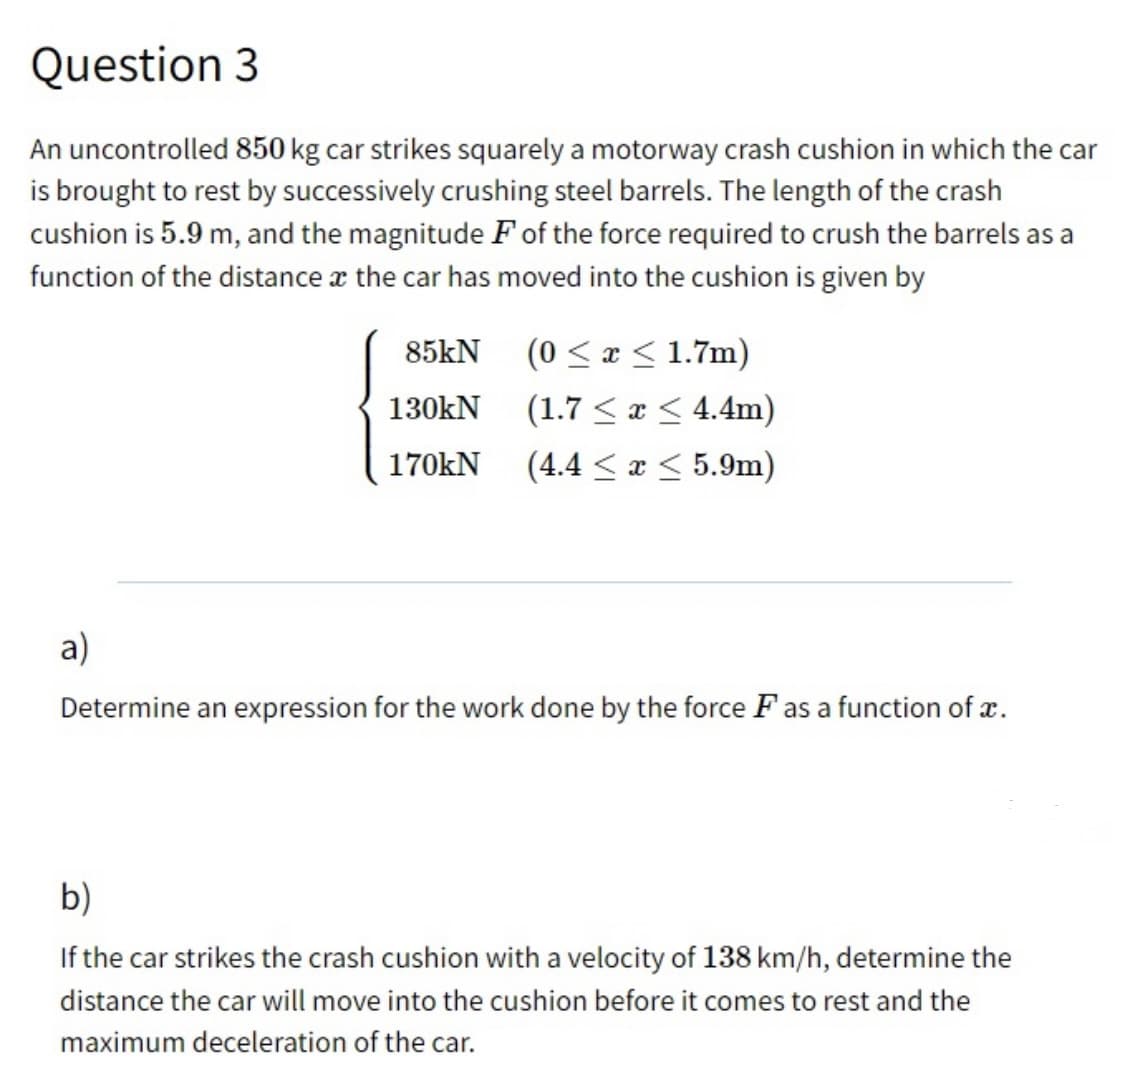 Question 3
An uncontrolled 850 kg car strikes squarely a motorway crash cushion in which the car
is brought to rest by successively crushing steel barrels. The length of the crash
cushion is 5.9 m, and the magnitude F of the force required to crush the barrels as a
function of the distance x the car has moved into the cushion is given by
(0 < x < 1.7m)
(1.7 < x < 4.4m)
(4.4 < x < 5.9m)
85kN
130kN
170kN
a)
Determine an expression for the work done by the force F as a function of x.
b)
If the car strikes the crash cushion with a velocity of 138 km/h, determine the
distance the car will move into the cushion before it comes to rest and the
maximum deceleration of the car.
